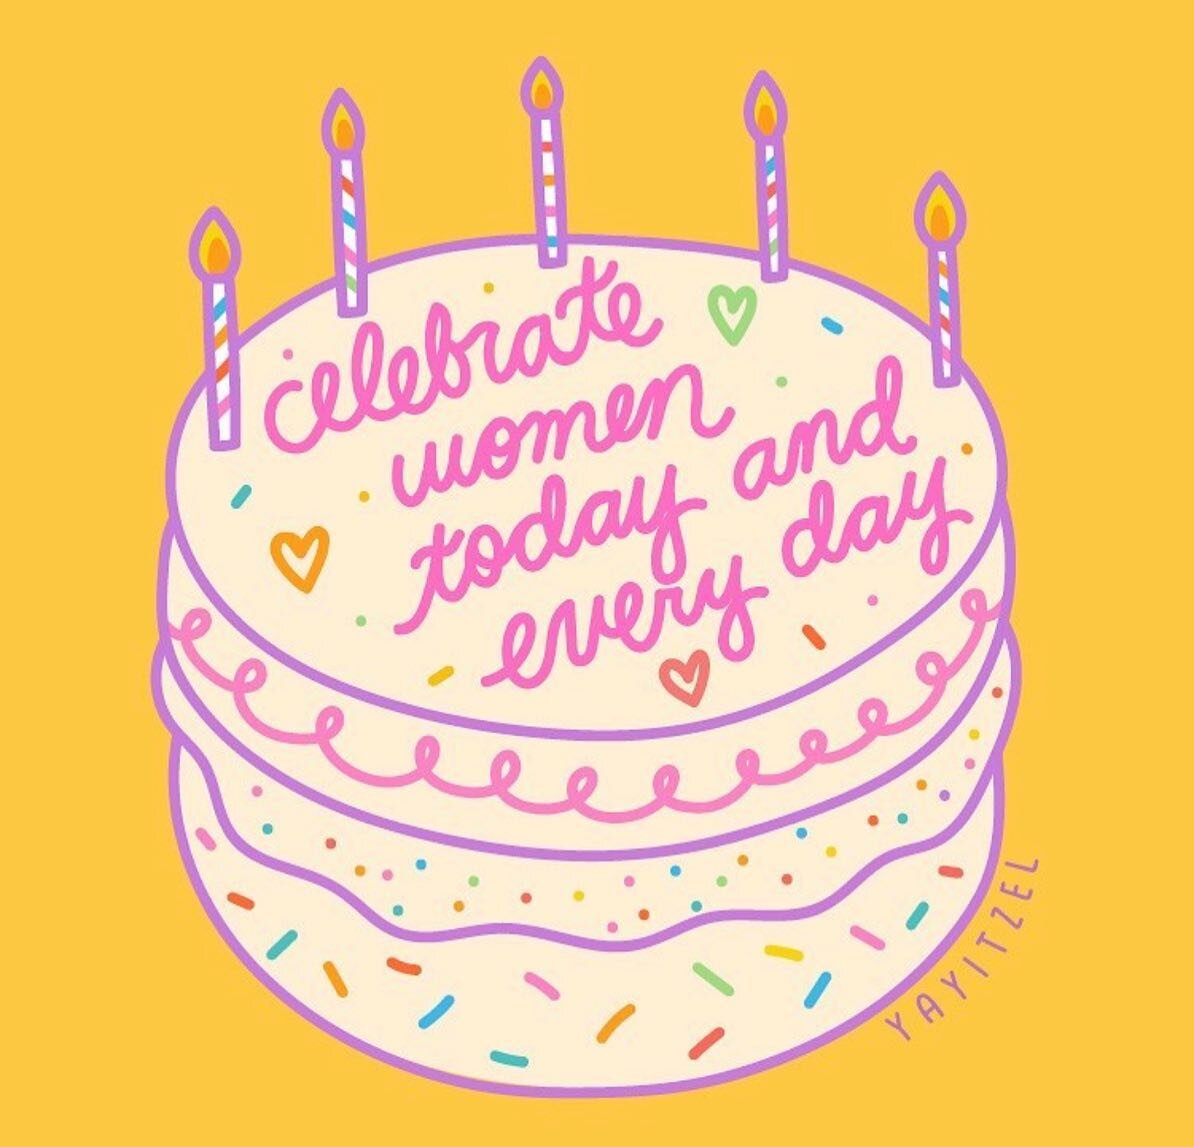 🚺💕 Women&rsquo;s History Month💕🚺

March is #womenshistorymonth! Although everyday should be women&rsquo;s day, 😌 March 1st - March 31st is dedicated to celebrating the infinite accomplishments and contributions that women have made to our histor